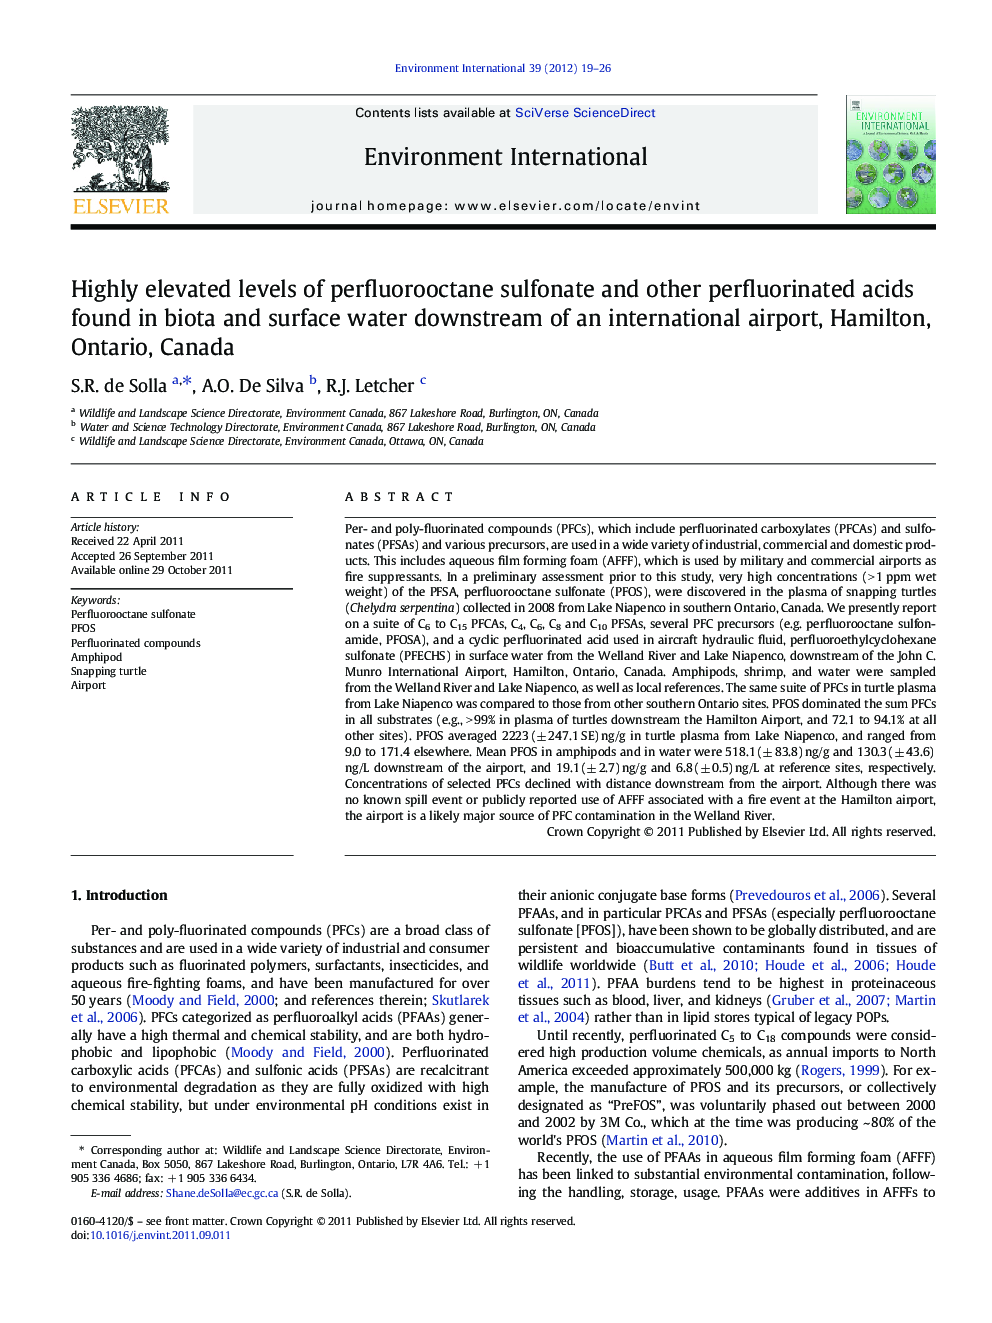 Highly elevated levels of perfluorooctane sulfonate and other perfluorinated acids found in biota and surface water downstream of an international airport, Hamilton, Ontario, Canada